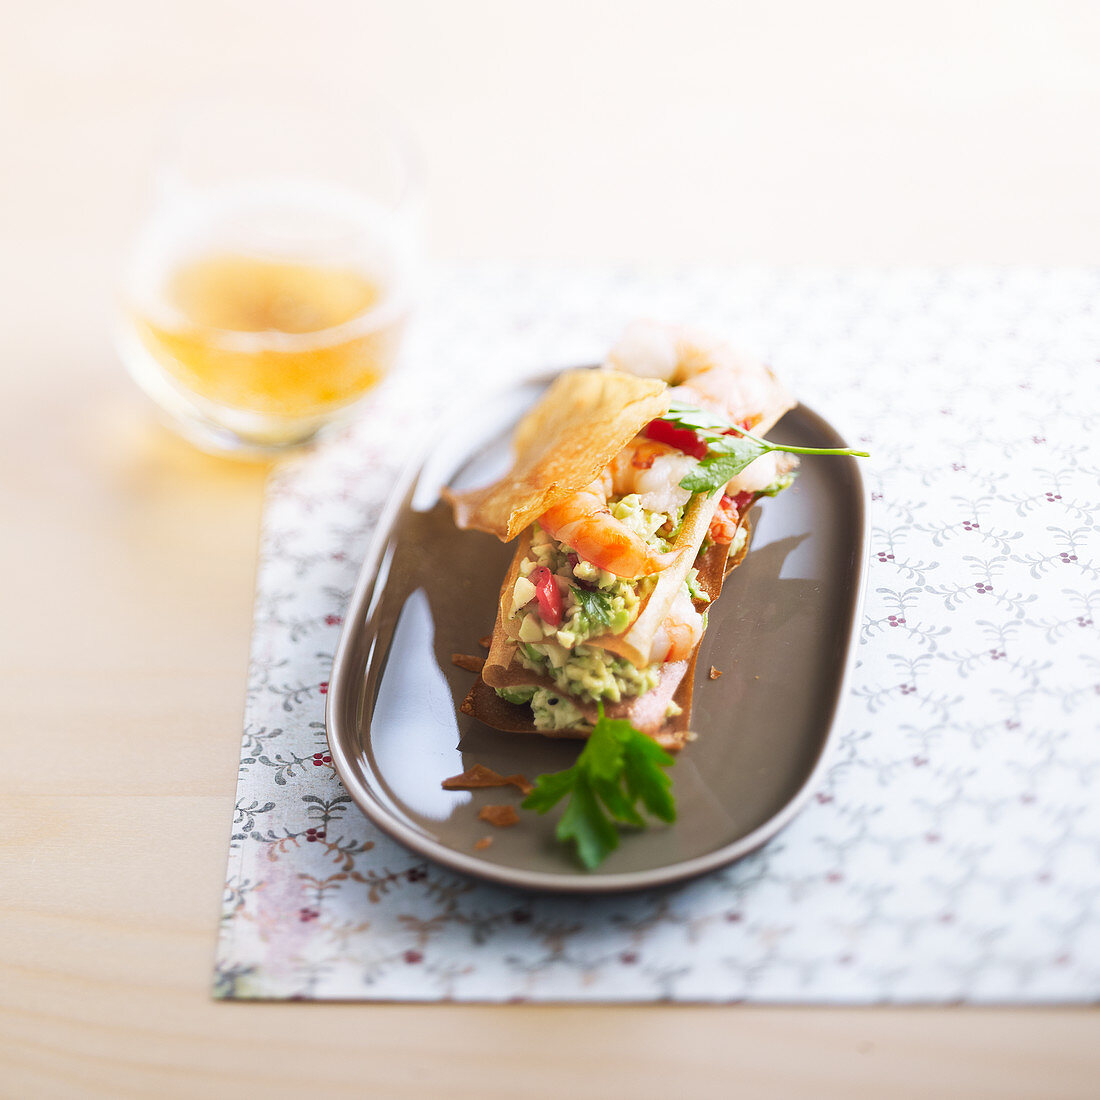 Mille feuille of avocado with gamba and cider